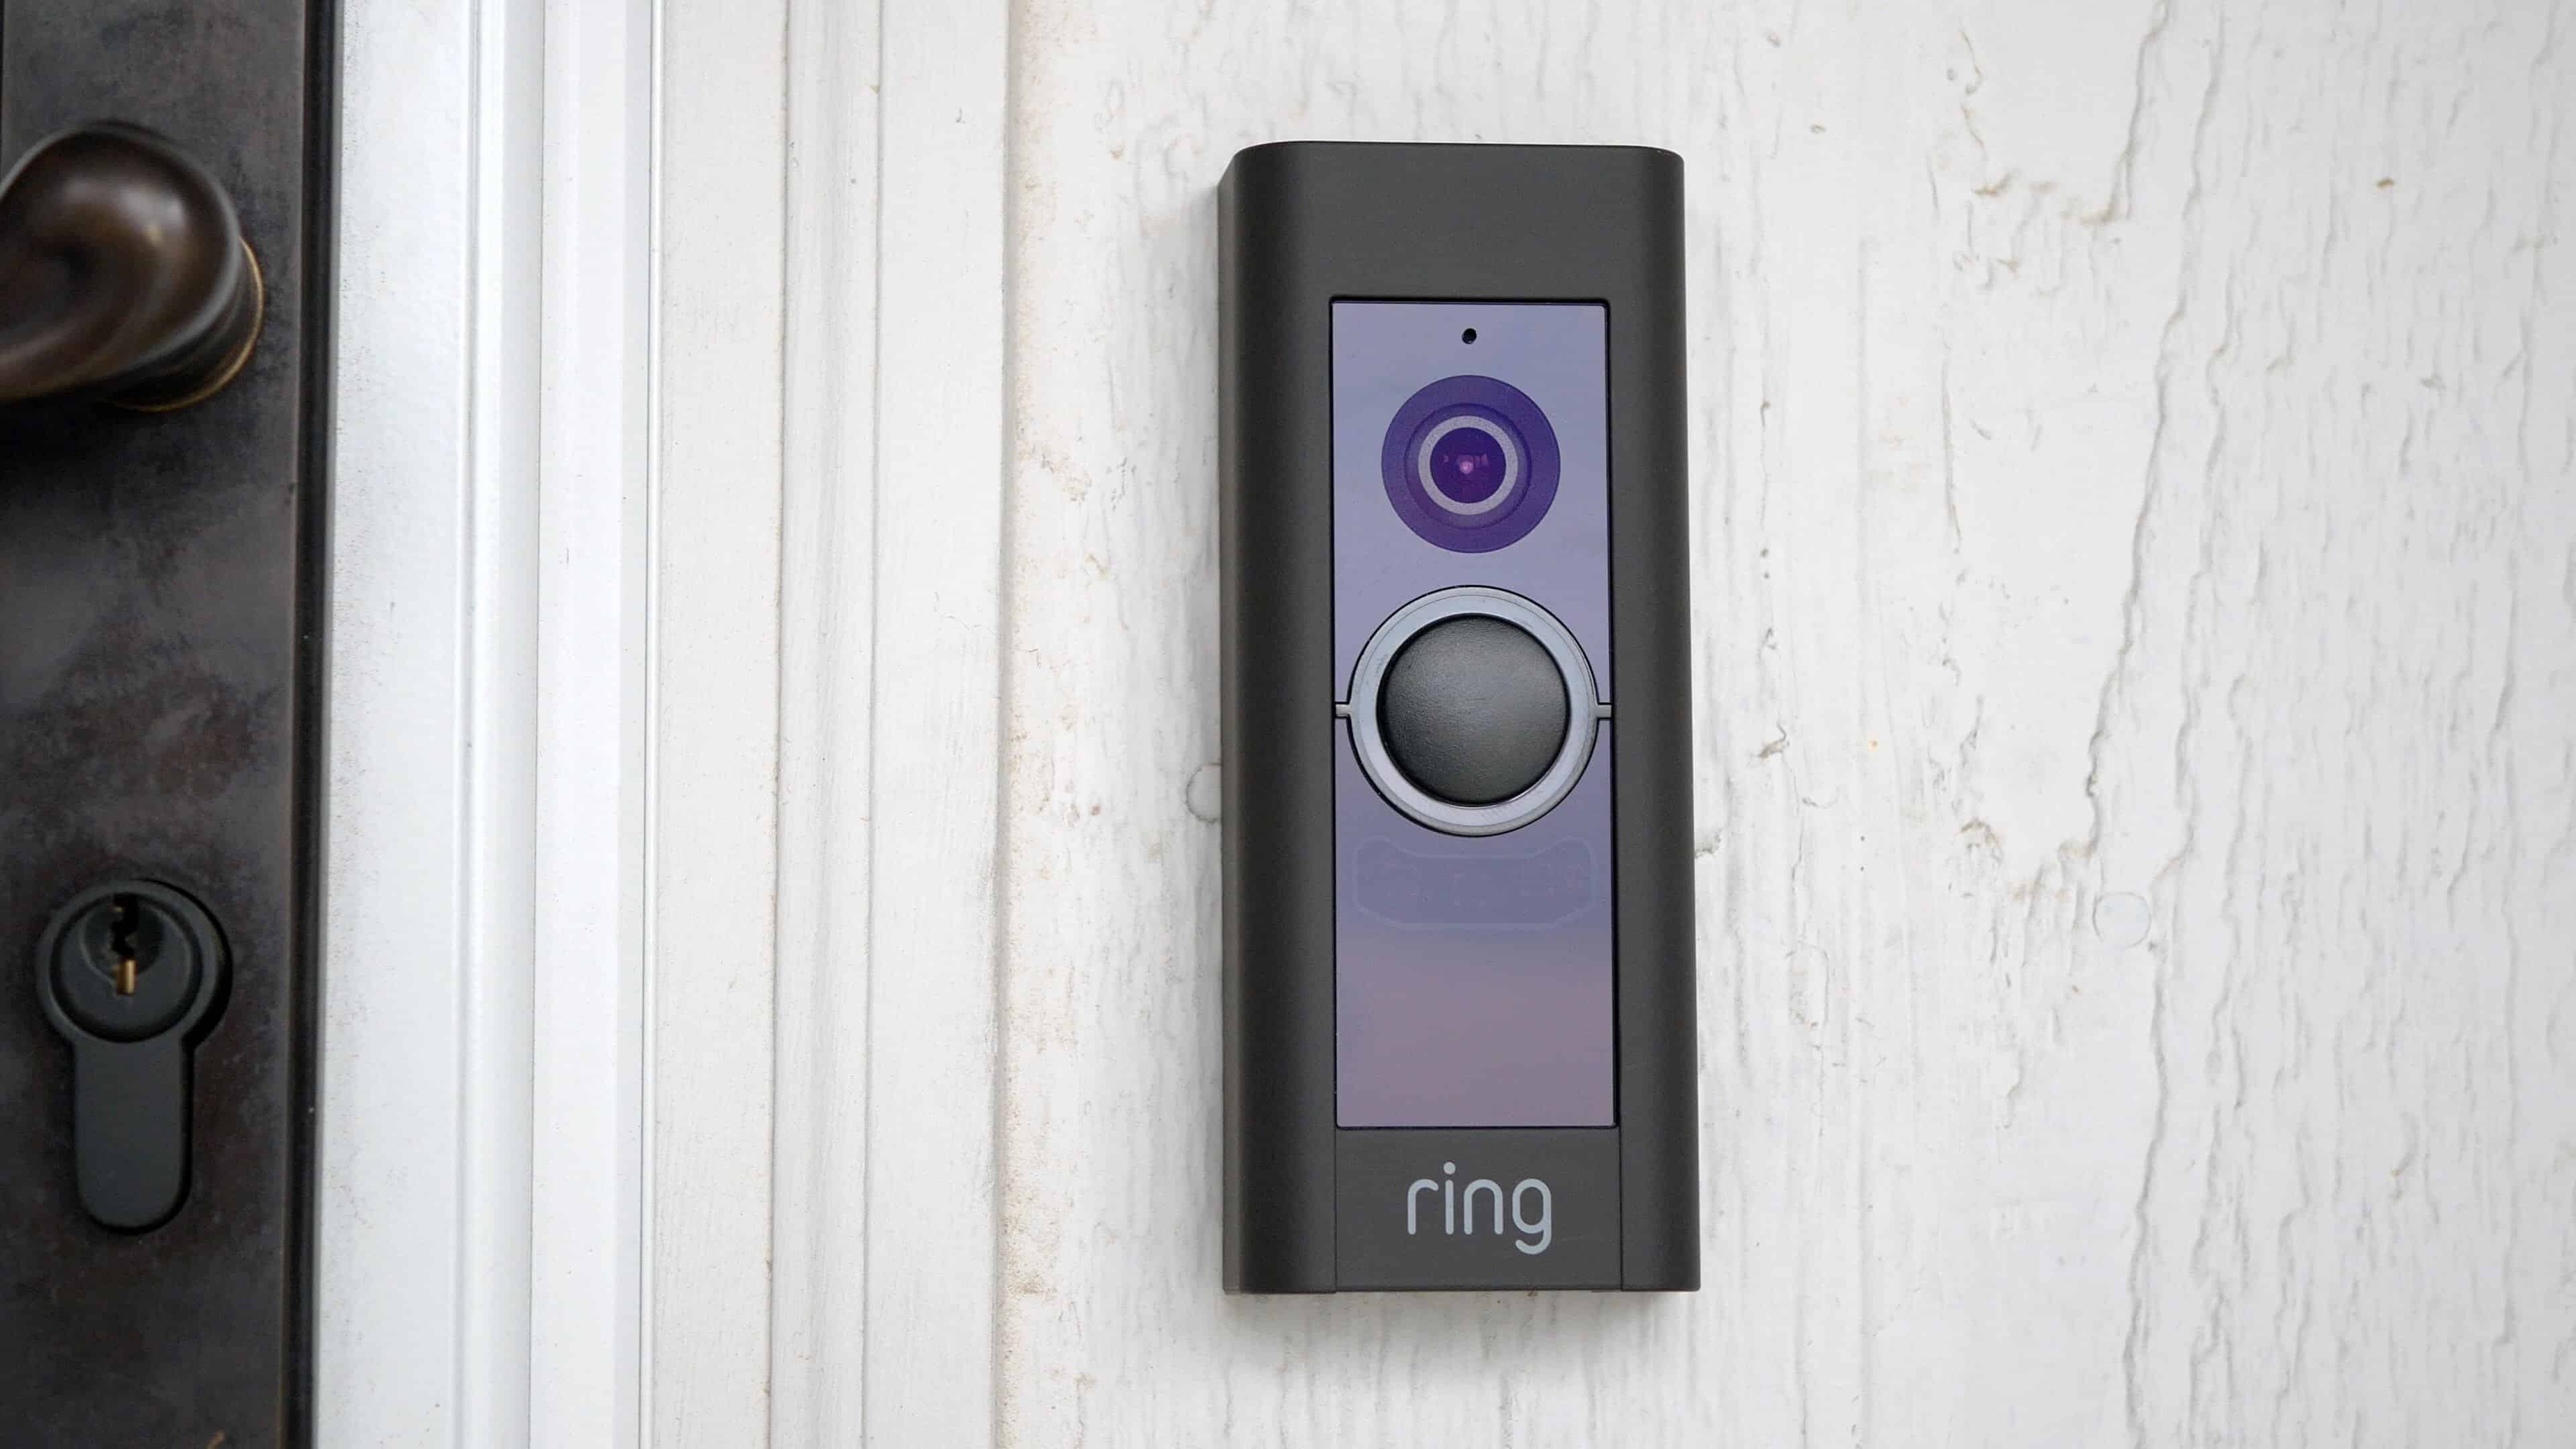 Amazon’s acquisition of Ring doesn’t mean the end of HomeKit support